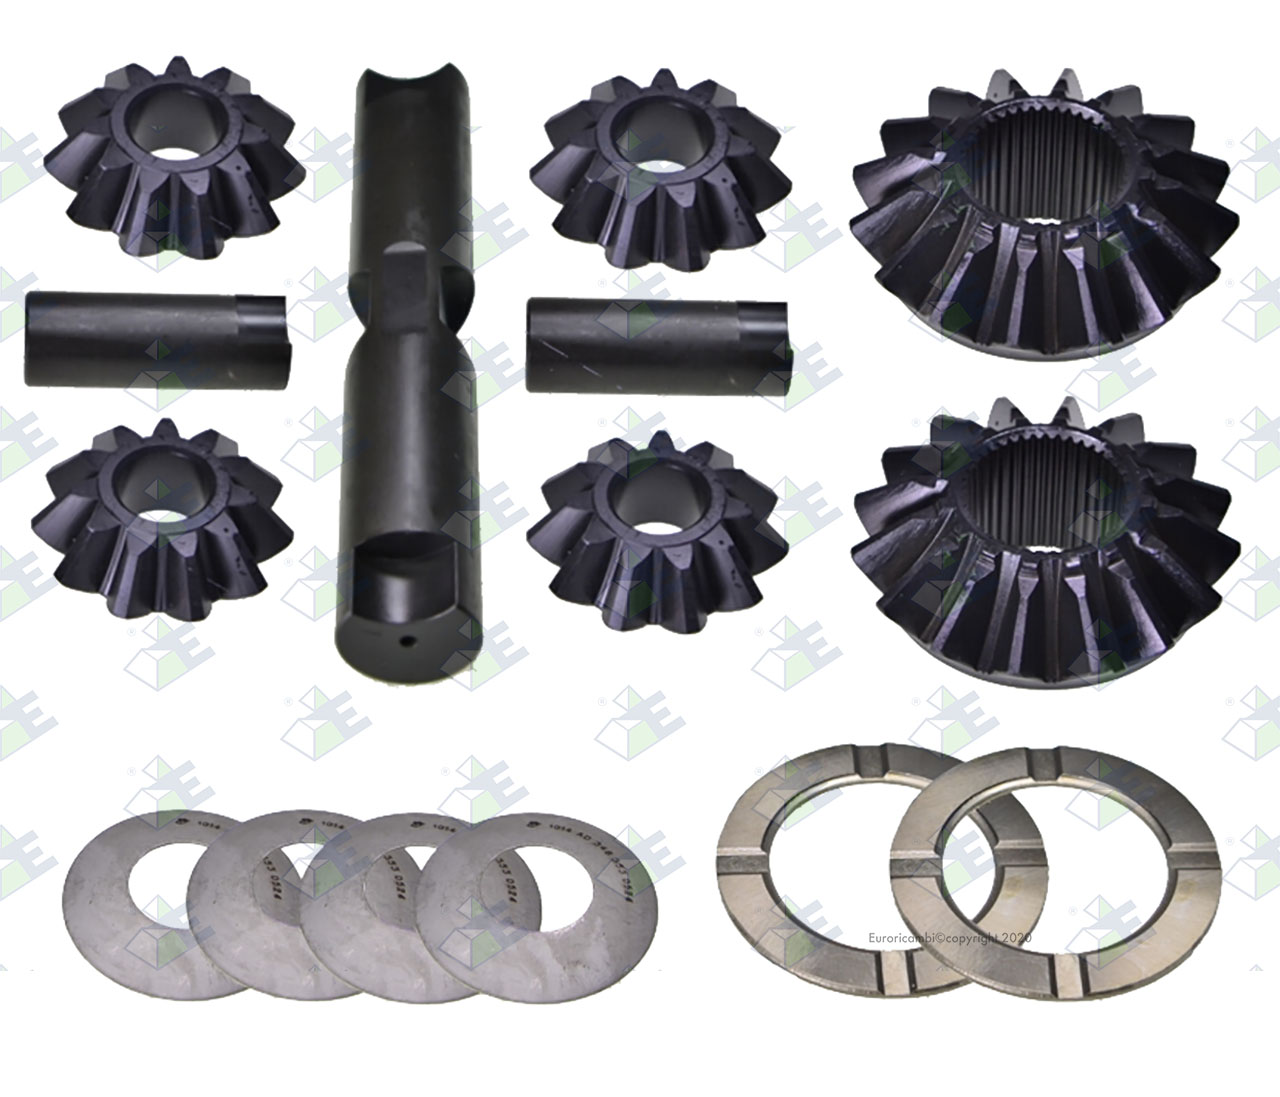 DIFFERENTIAL GEAR KIT suitable to AM GEARS 65383